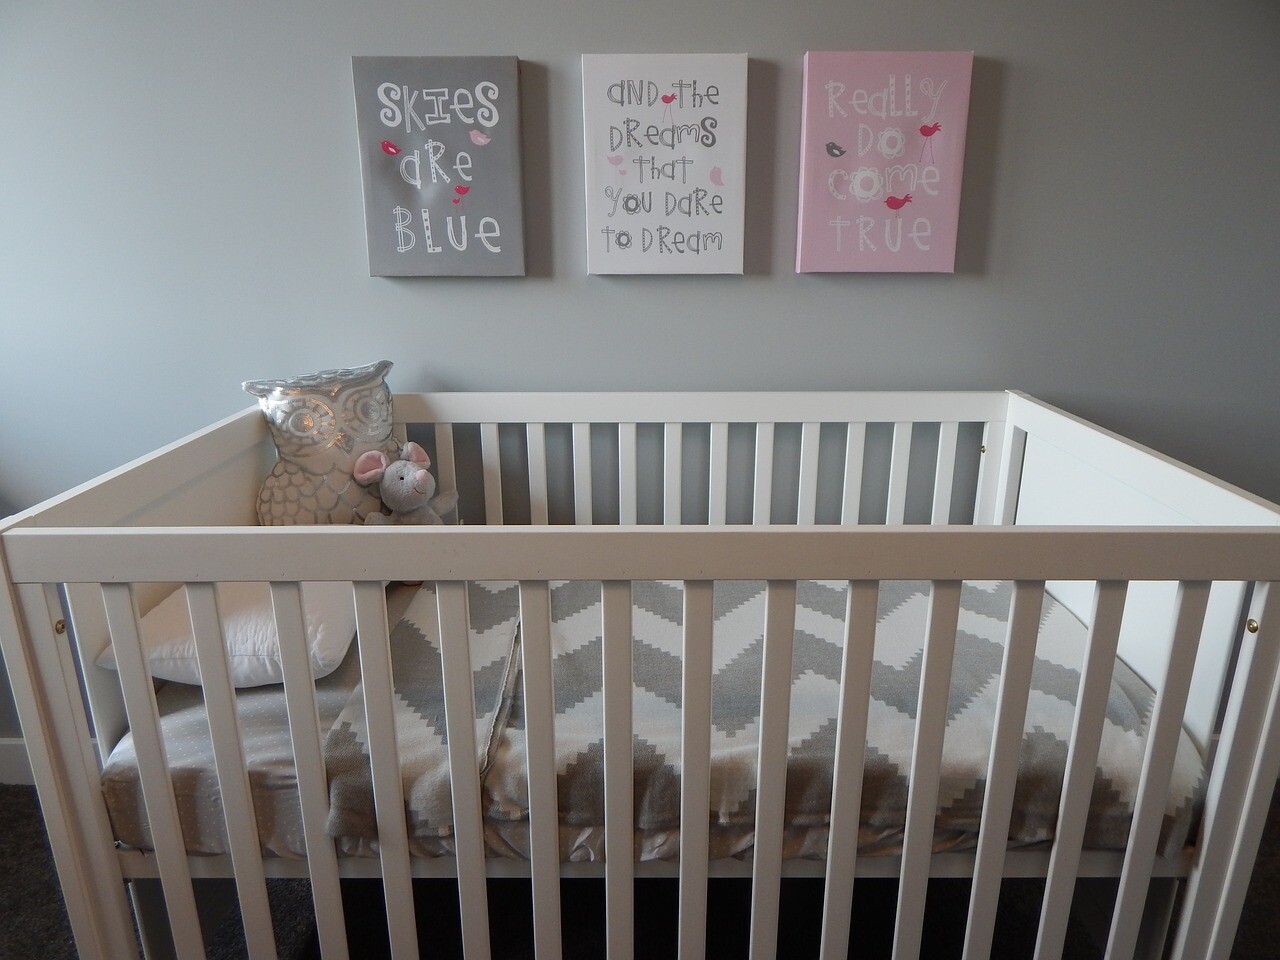 An ordinary white crib with grey and white sheets